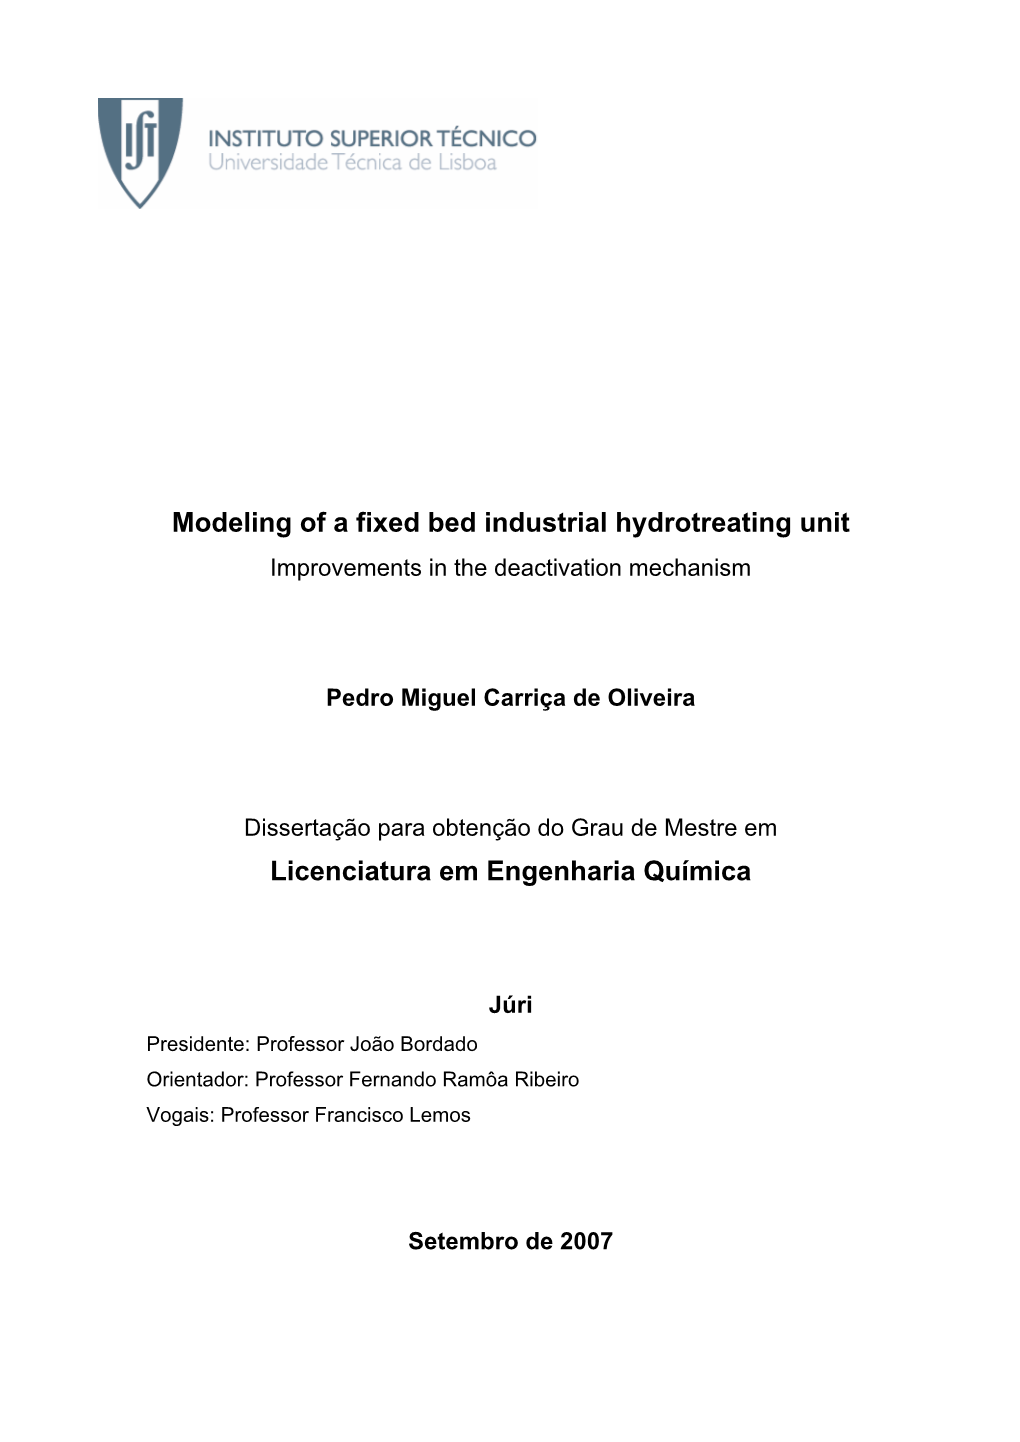 Modeling of a Fixed Bed Industrial Hydrotreating Unit Improvements in the Deactivation Mechanism